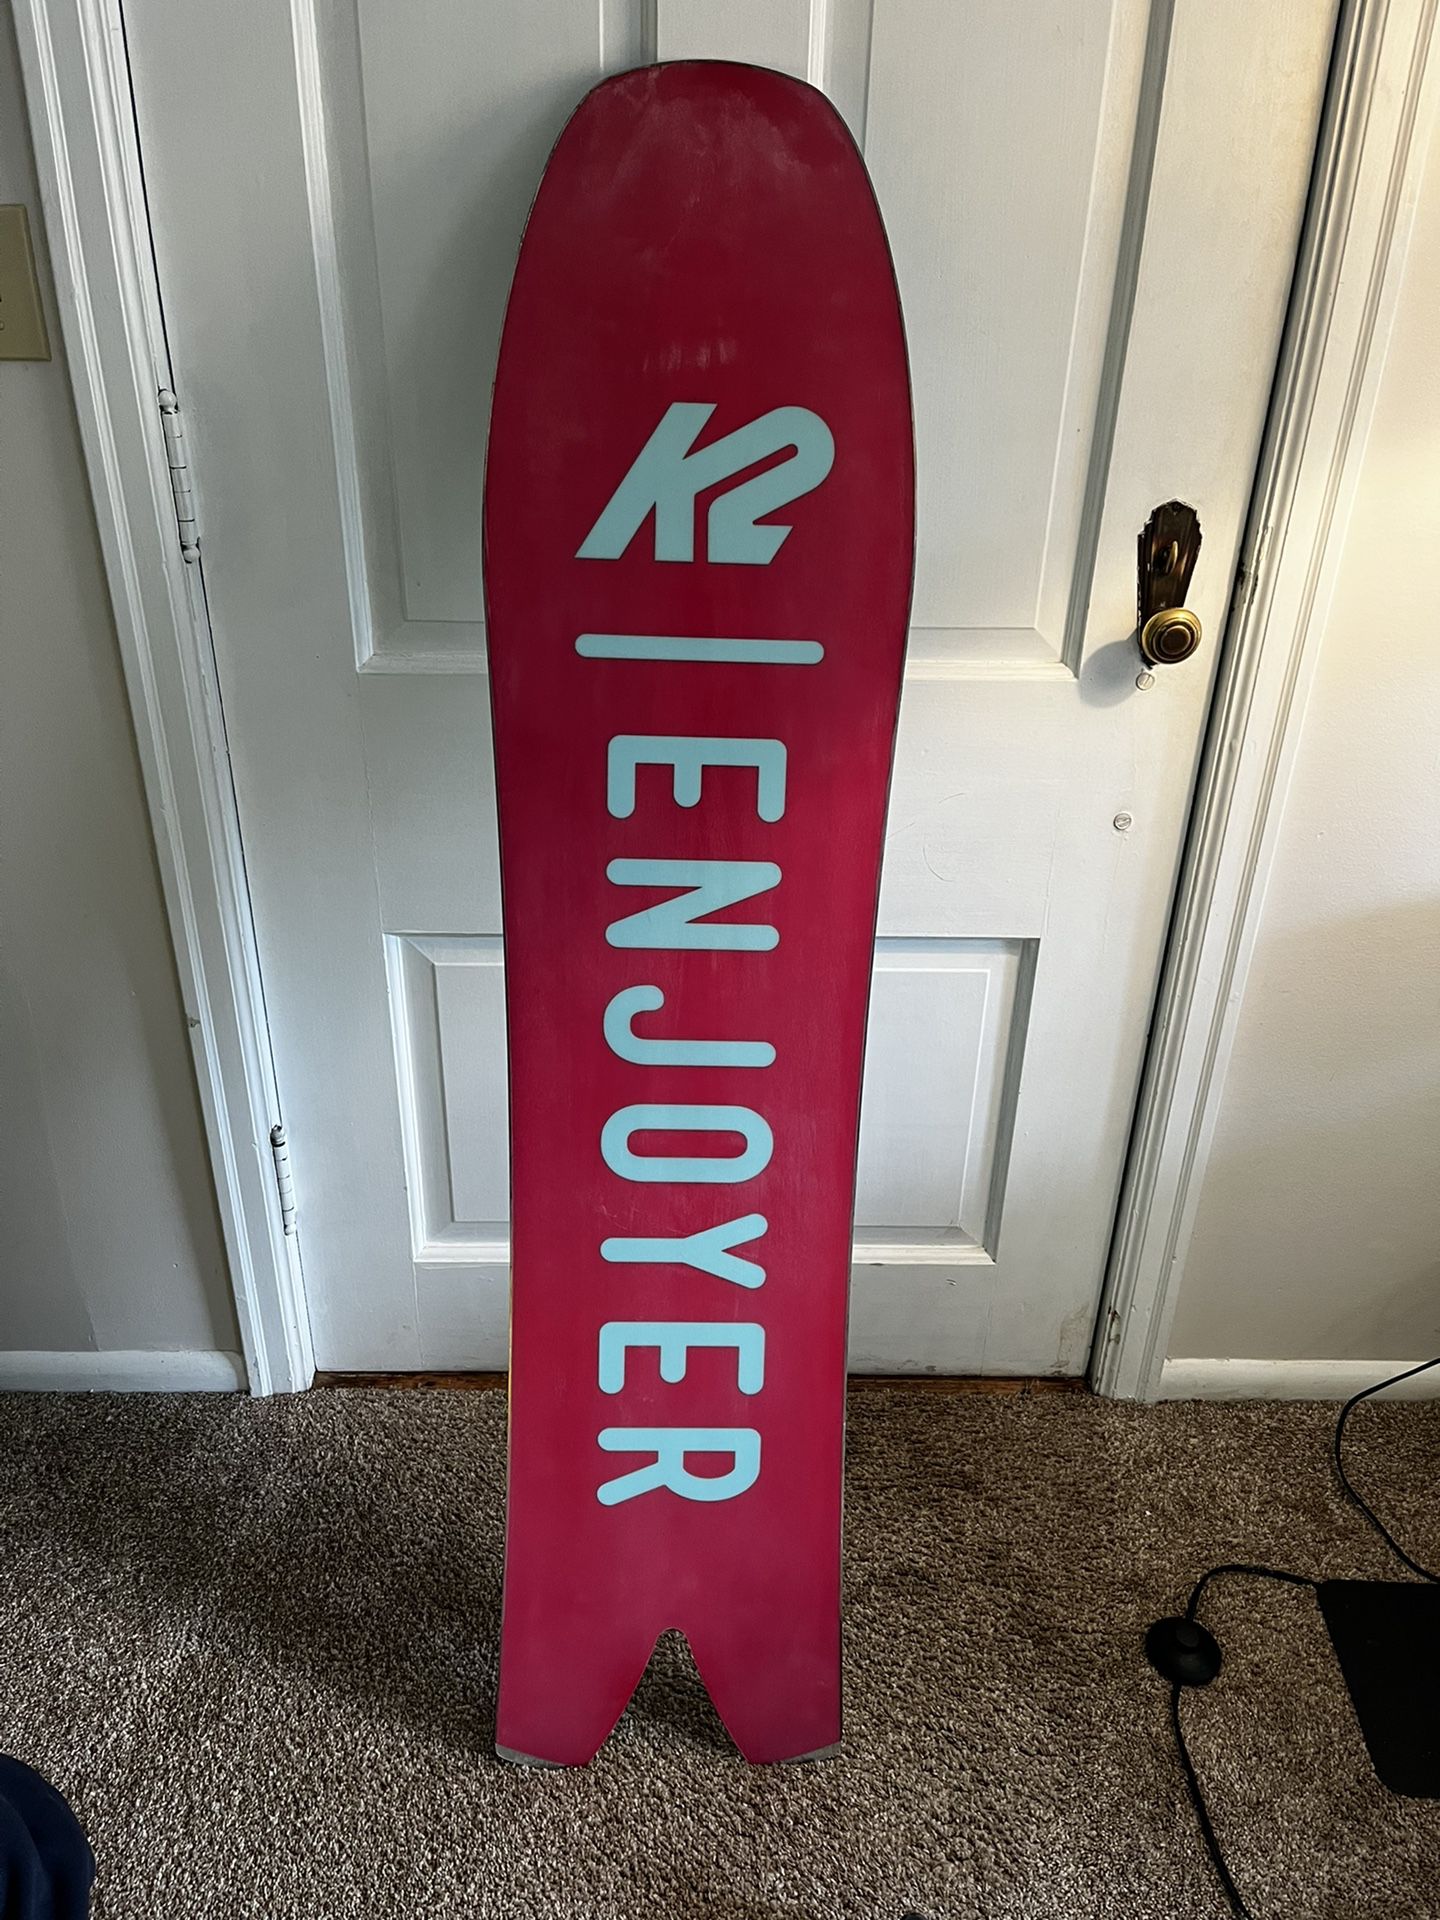 K2 Cool Bean 144cm for Sale in Snoqualmie, WA - OfferUp